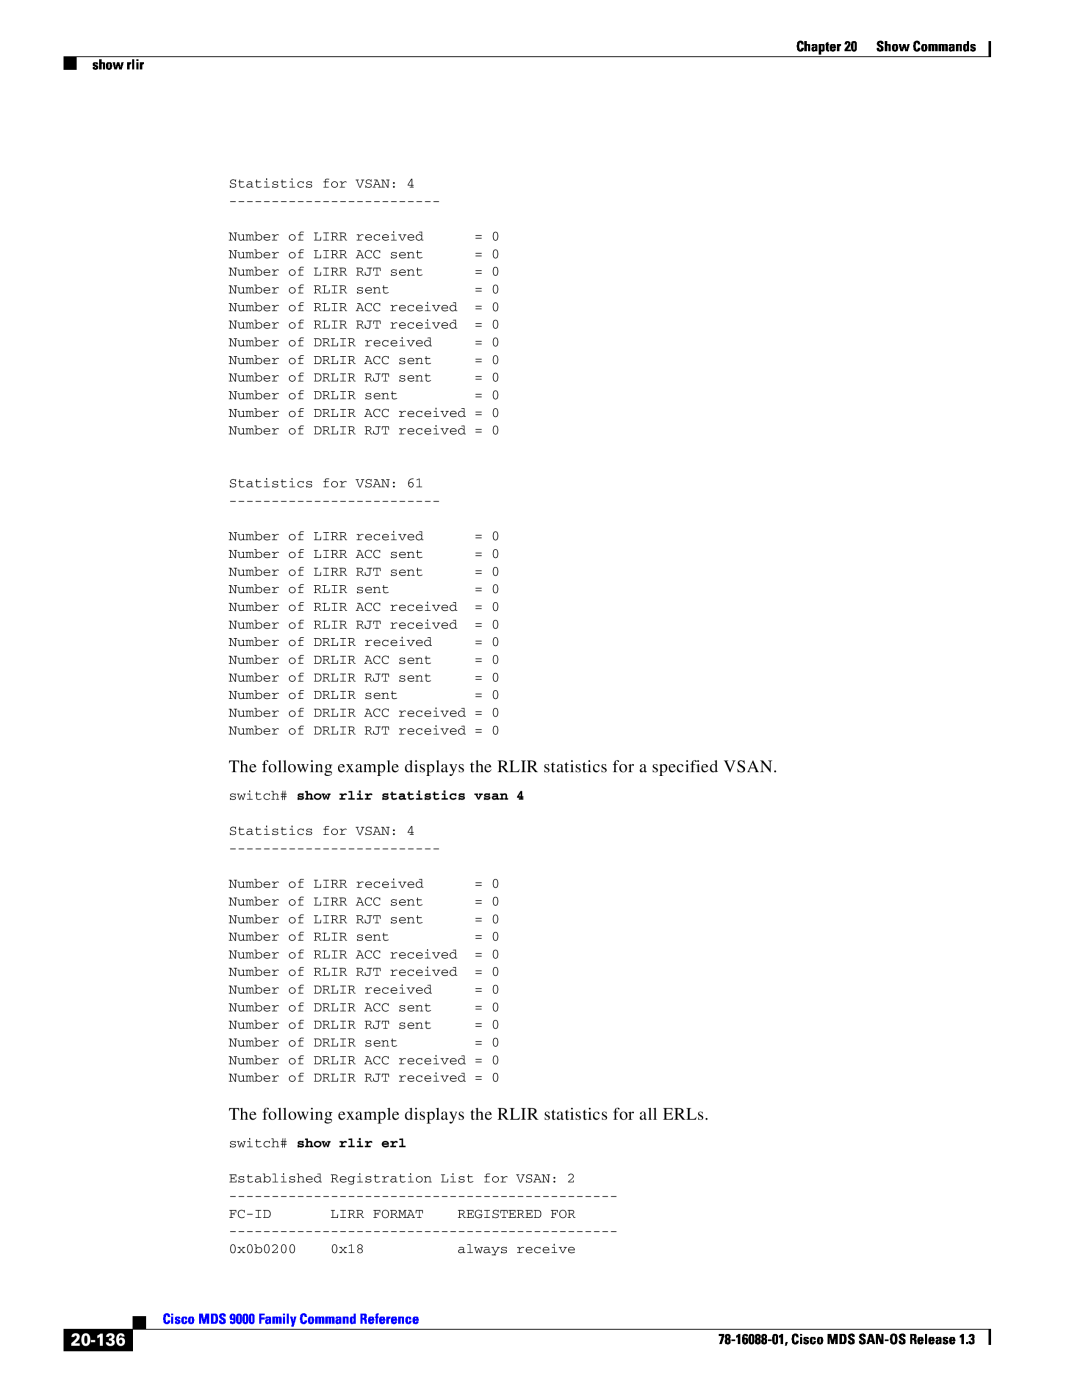 Cisco Systems MDS 9000 20-136, The following example displays the RLIR statistics for all ERLs, Show Commands show rlir 